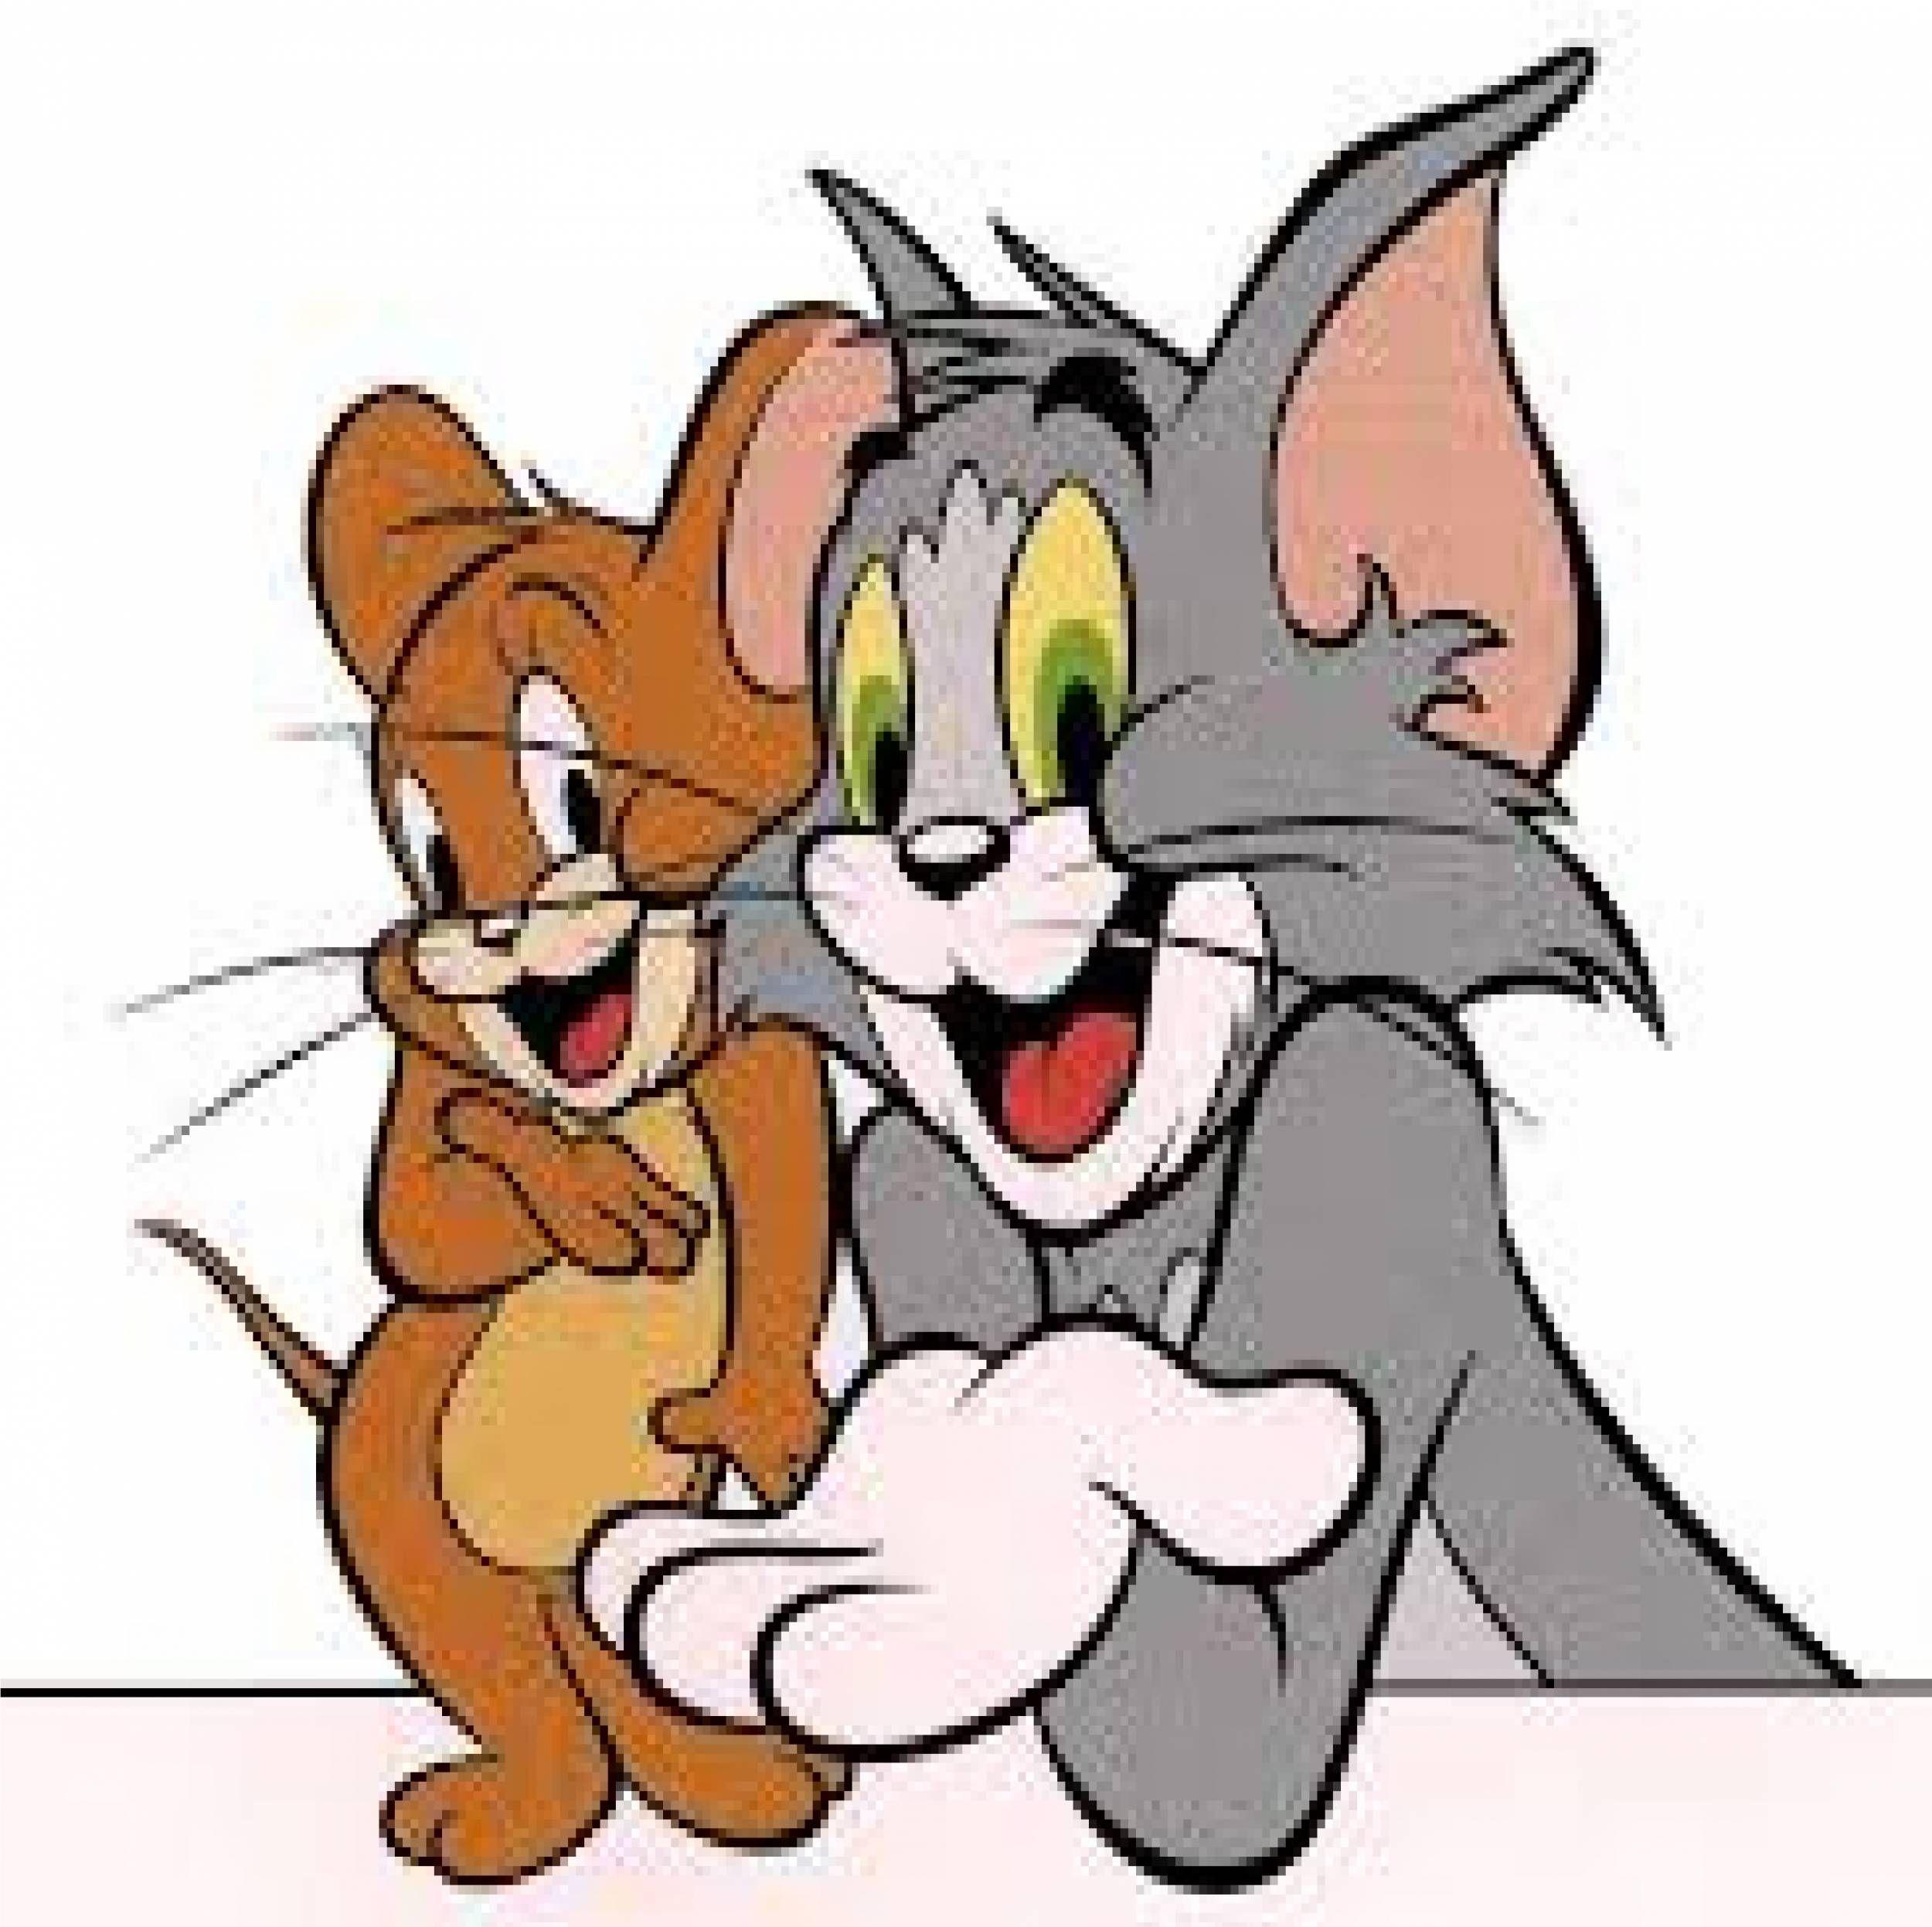 free download tom and jerry videos for mobile